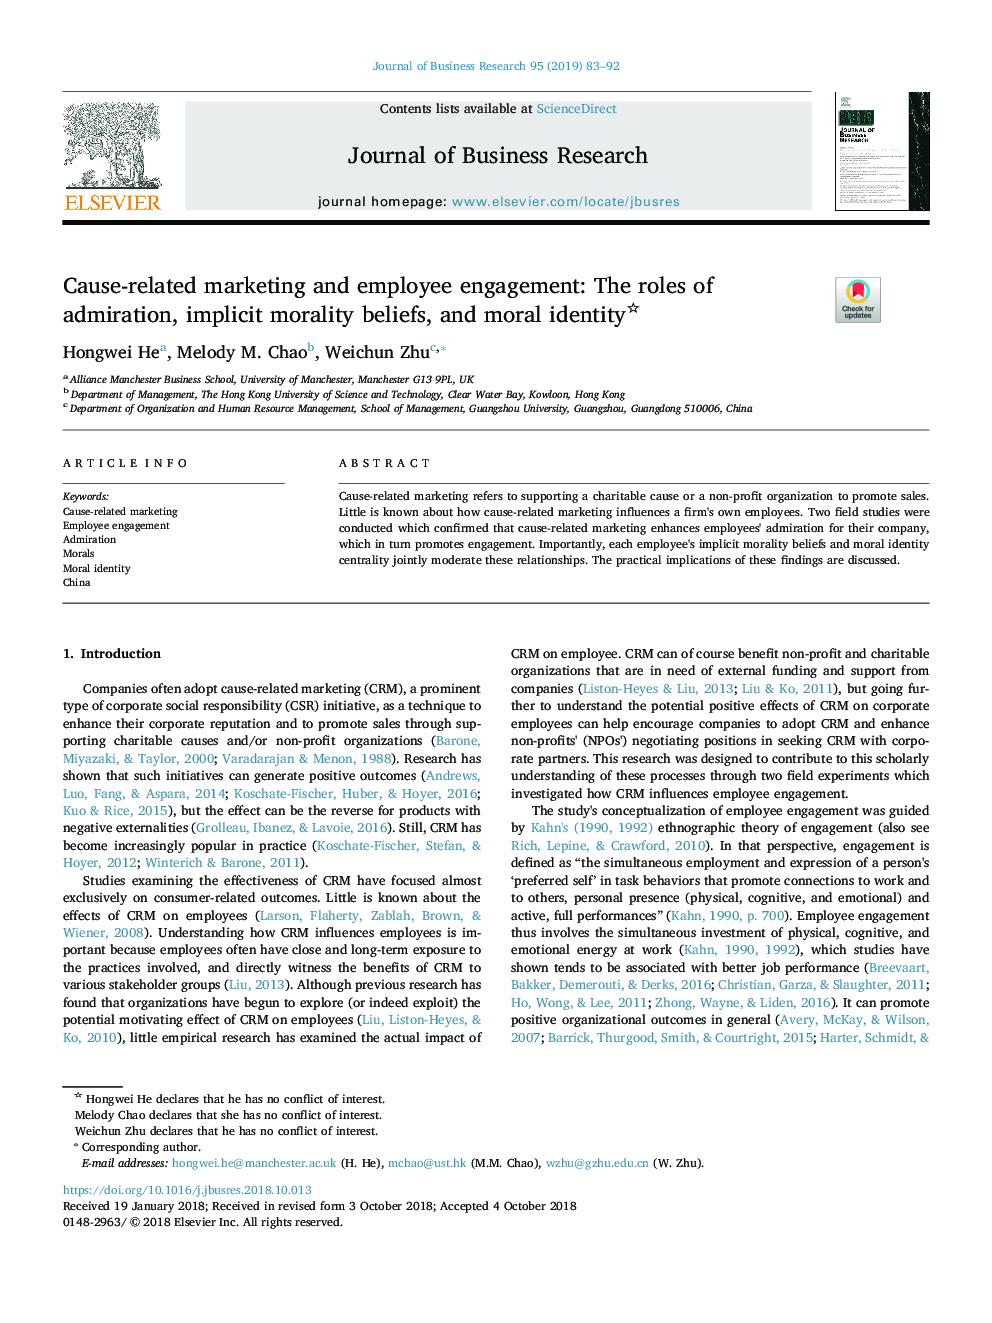 Cause-related marketing and employee engagement: The roles of admiration, implicit morality beliefs, and moral identity